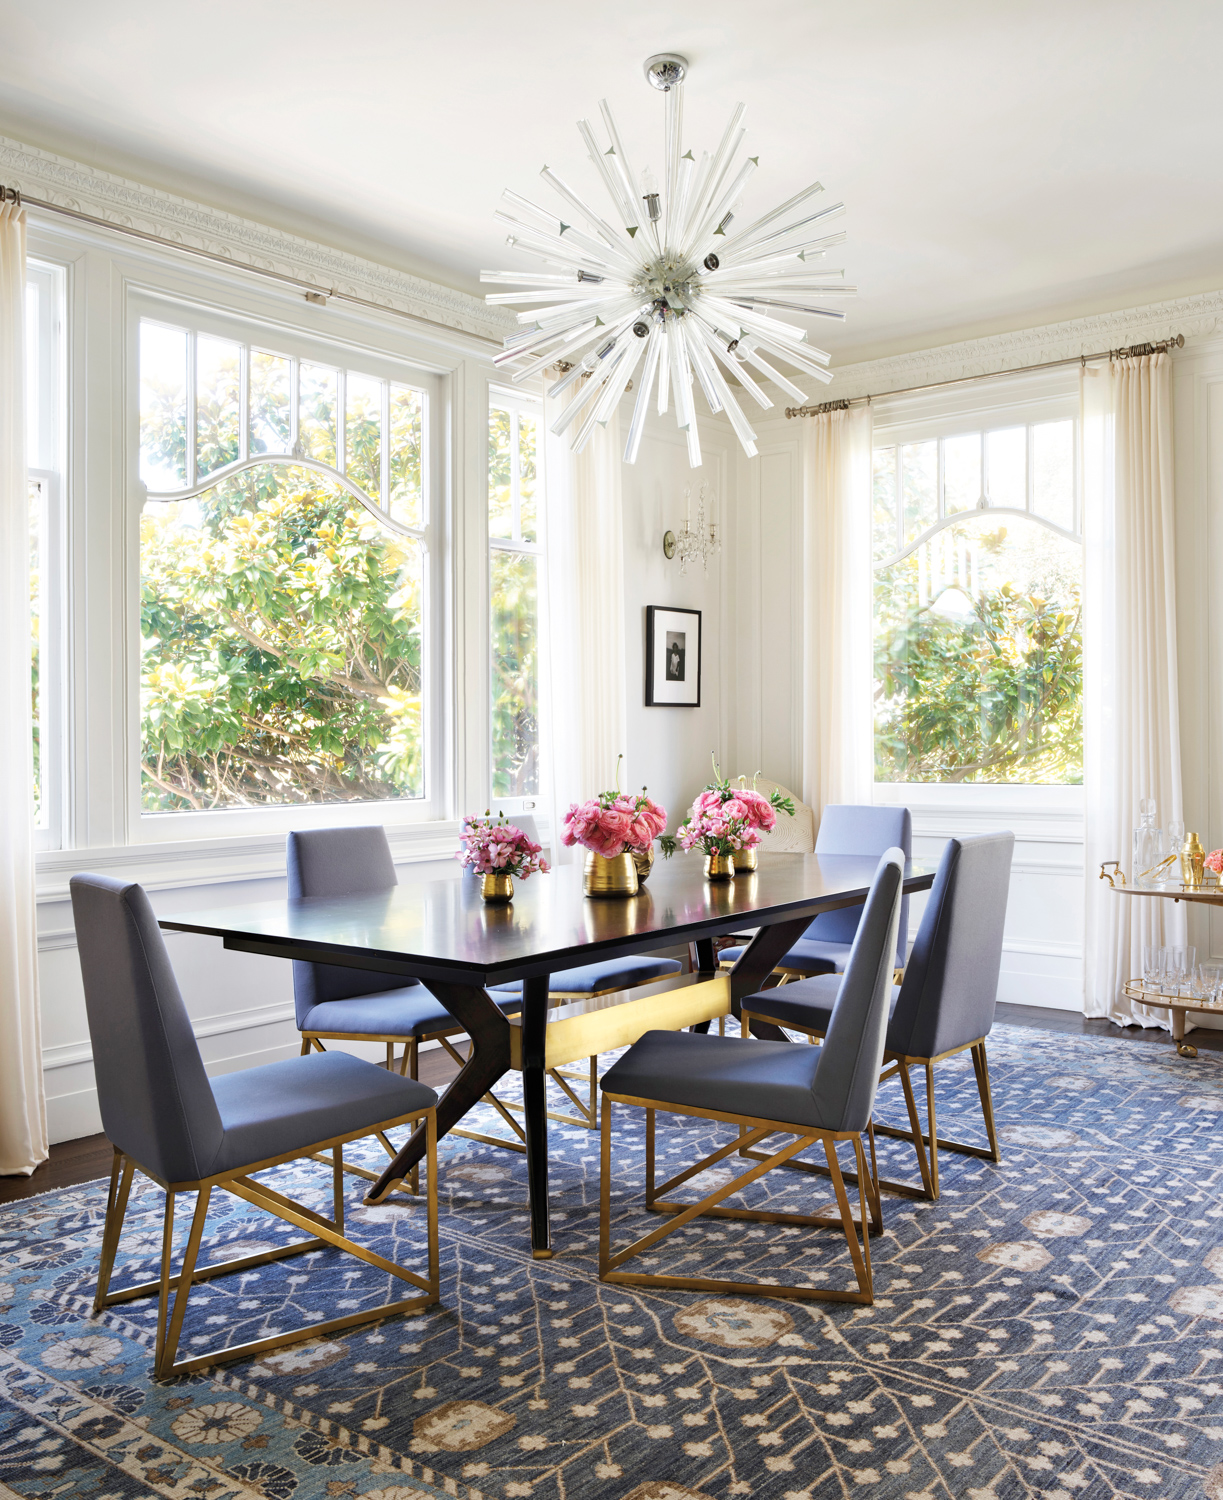 The dining room has a spiky light fixture and a modern table and chairs.